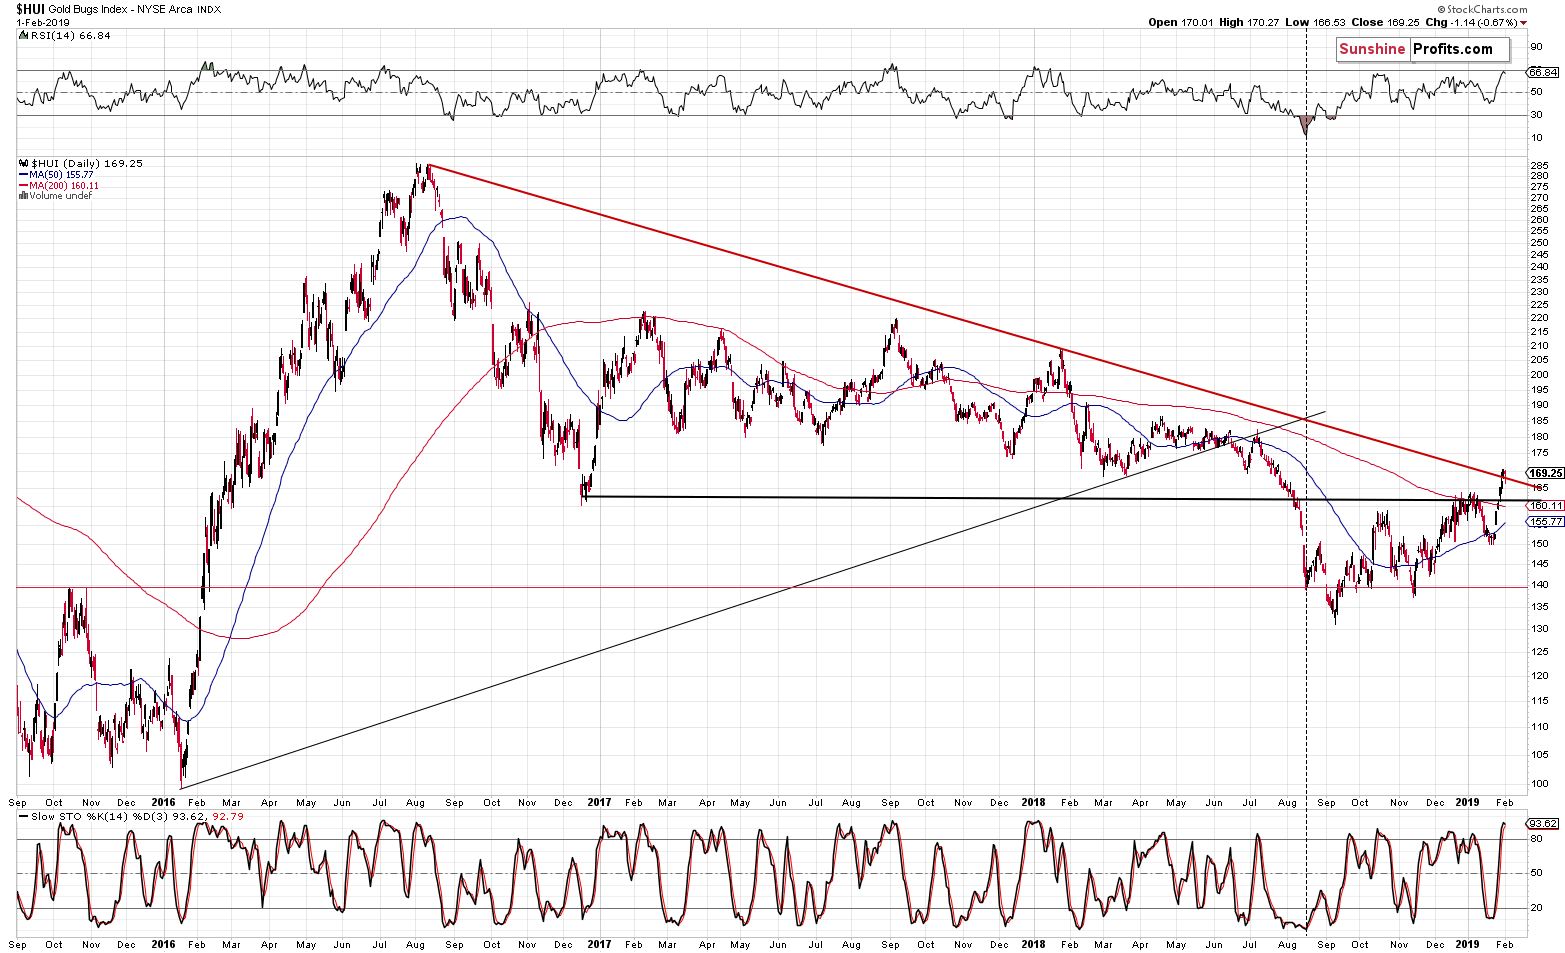 Gold Bugs Index